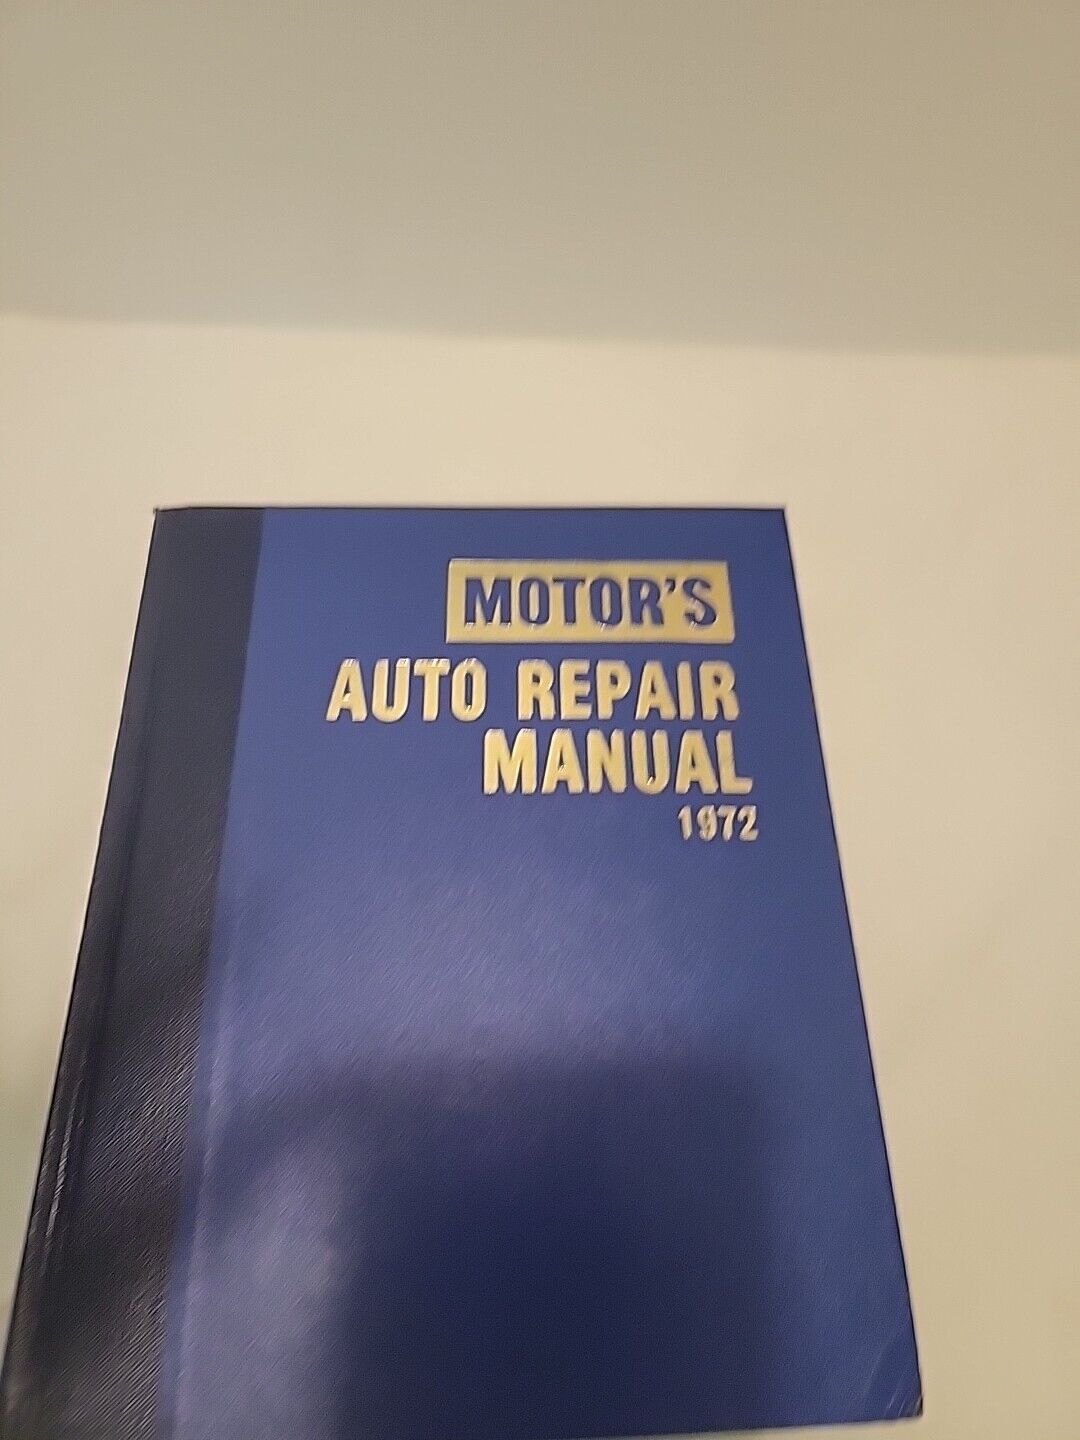 Vintage Motor's Auto Repair Manual 1972 35th Edition 1st Printing Hardcover